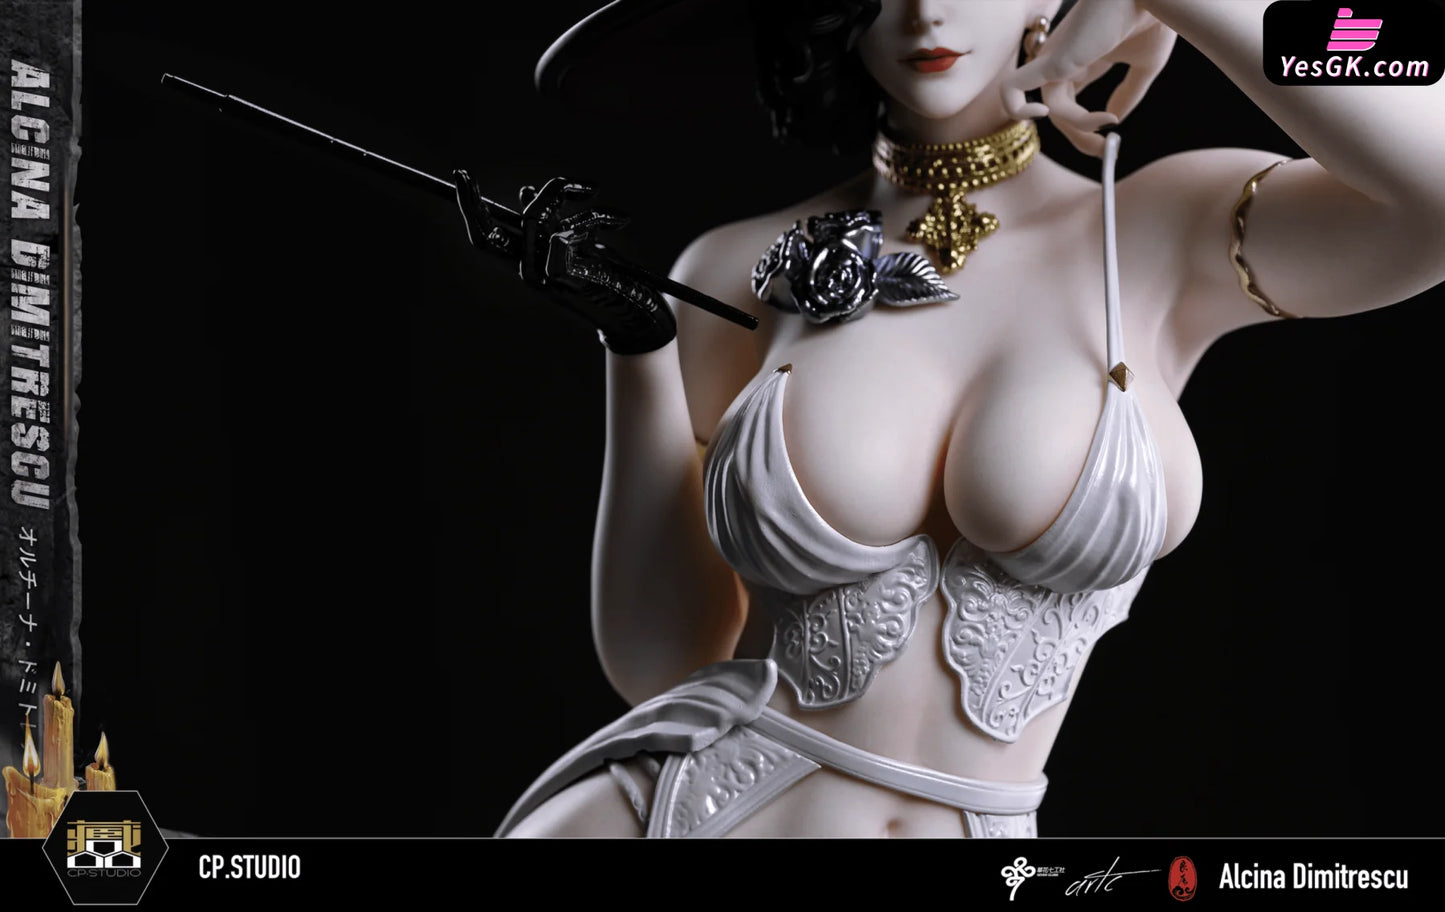 Resident Evil Series Female Body Complementary Program-Lady Dimitrescu Statue - Cp Studio [In-Stock]